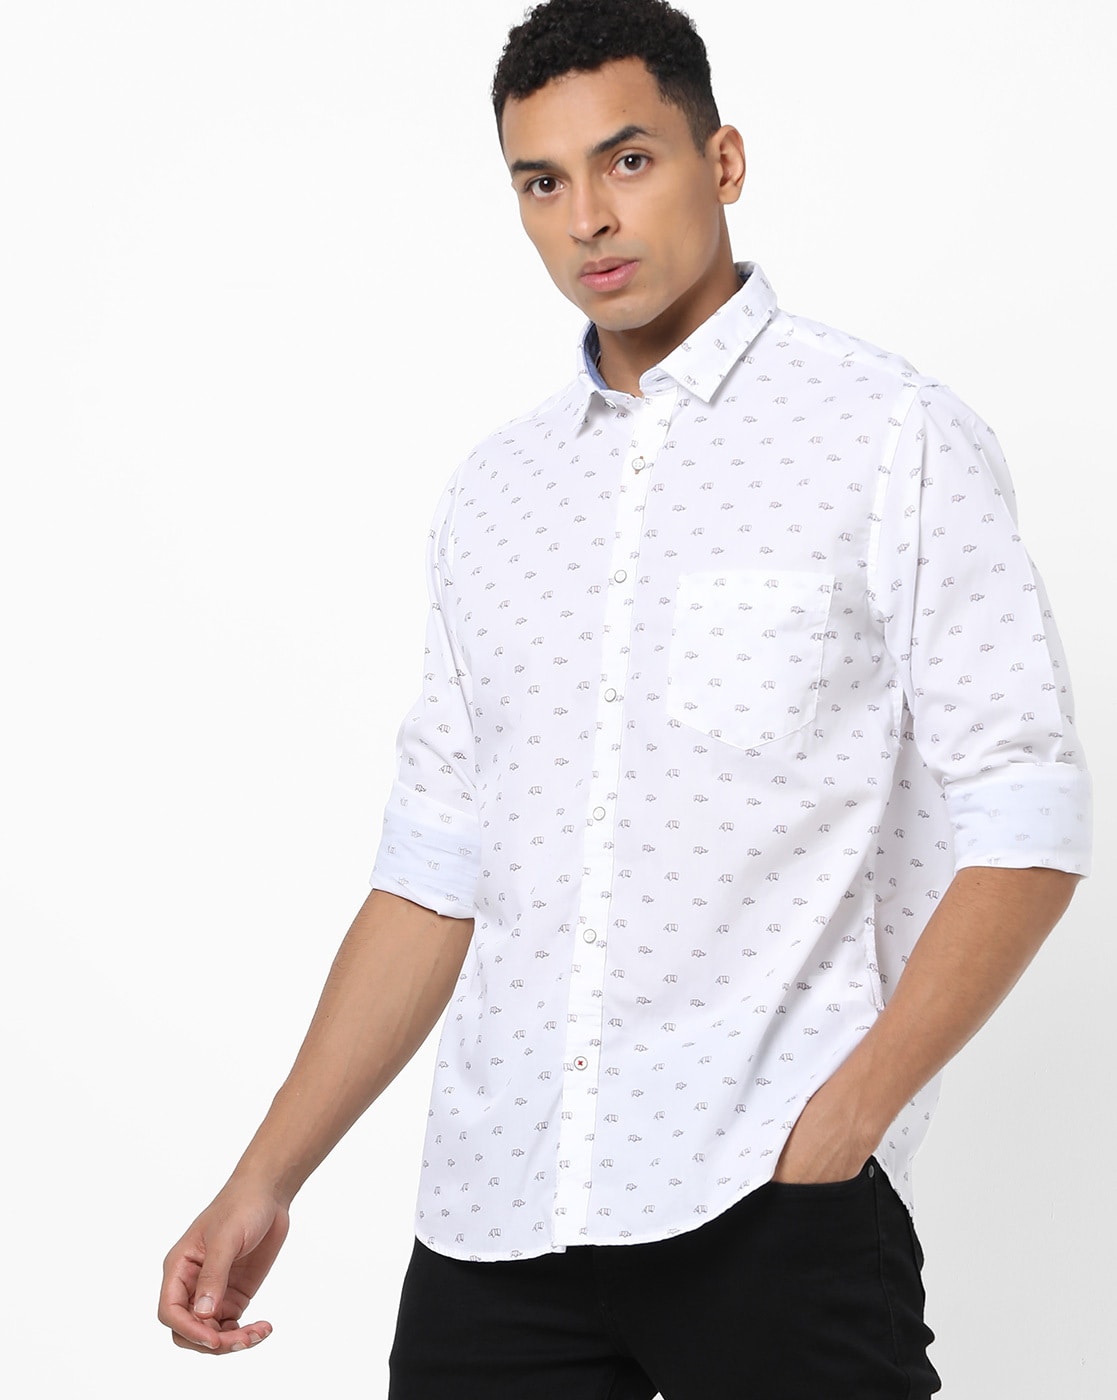 Buy > only vimal shirts online > in stock